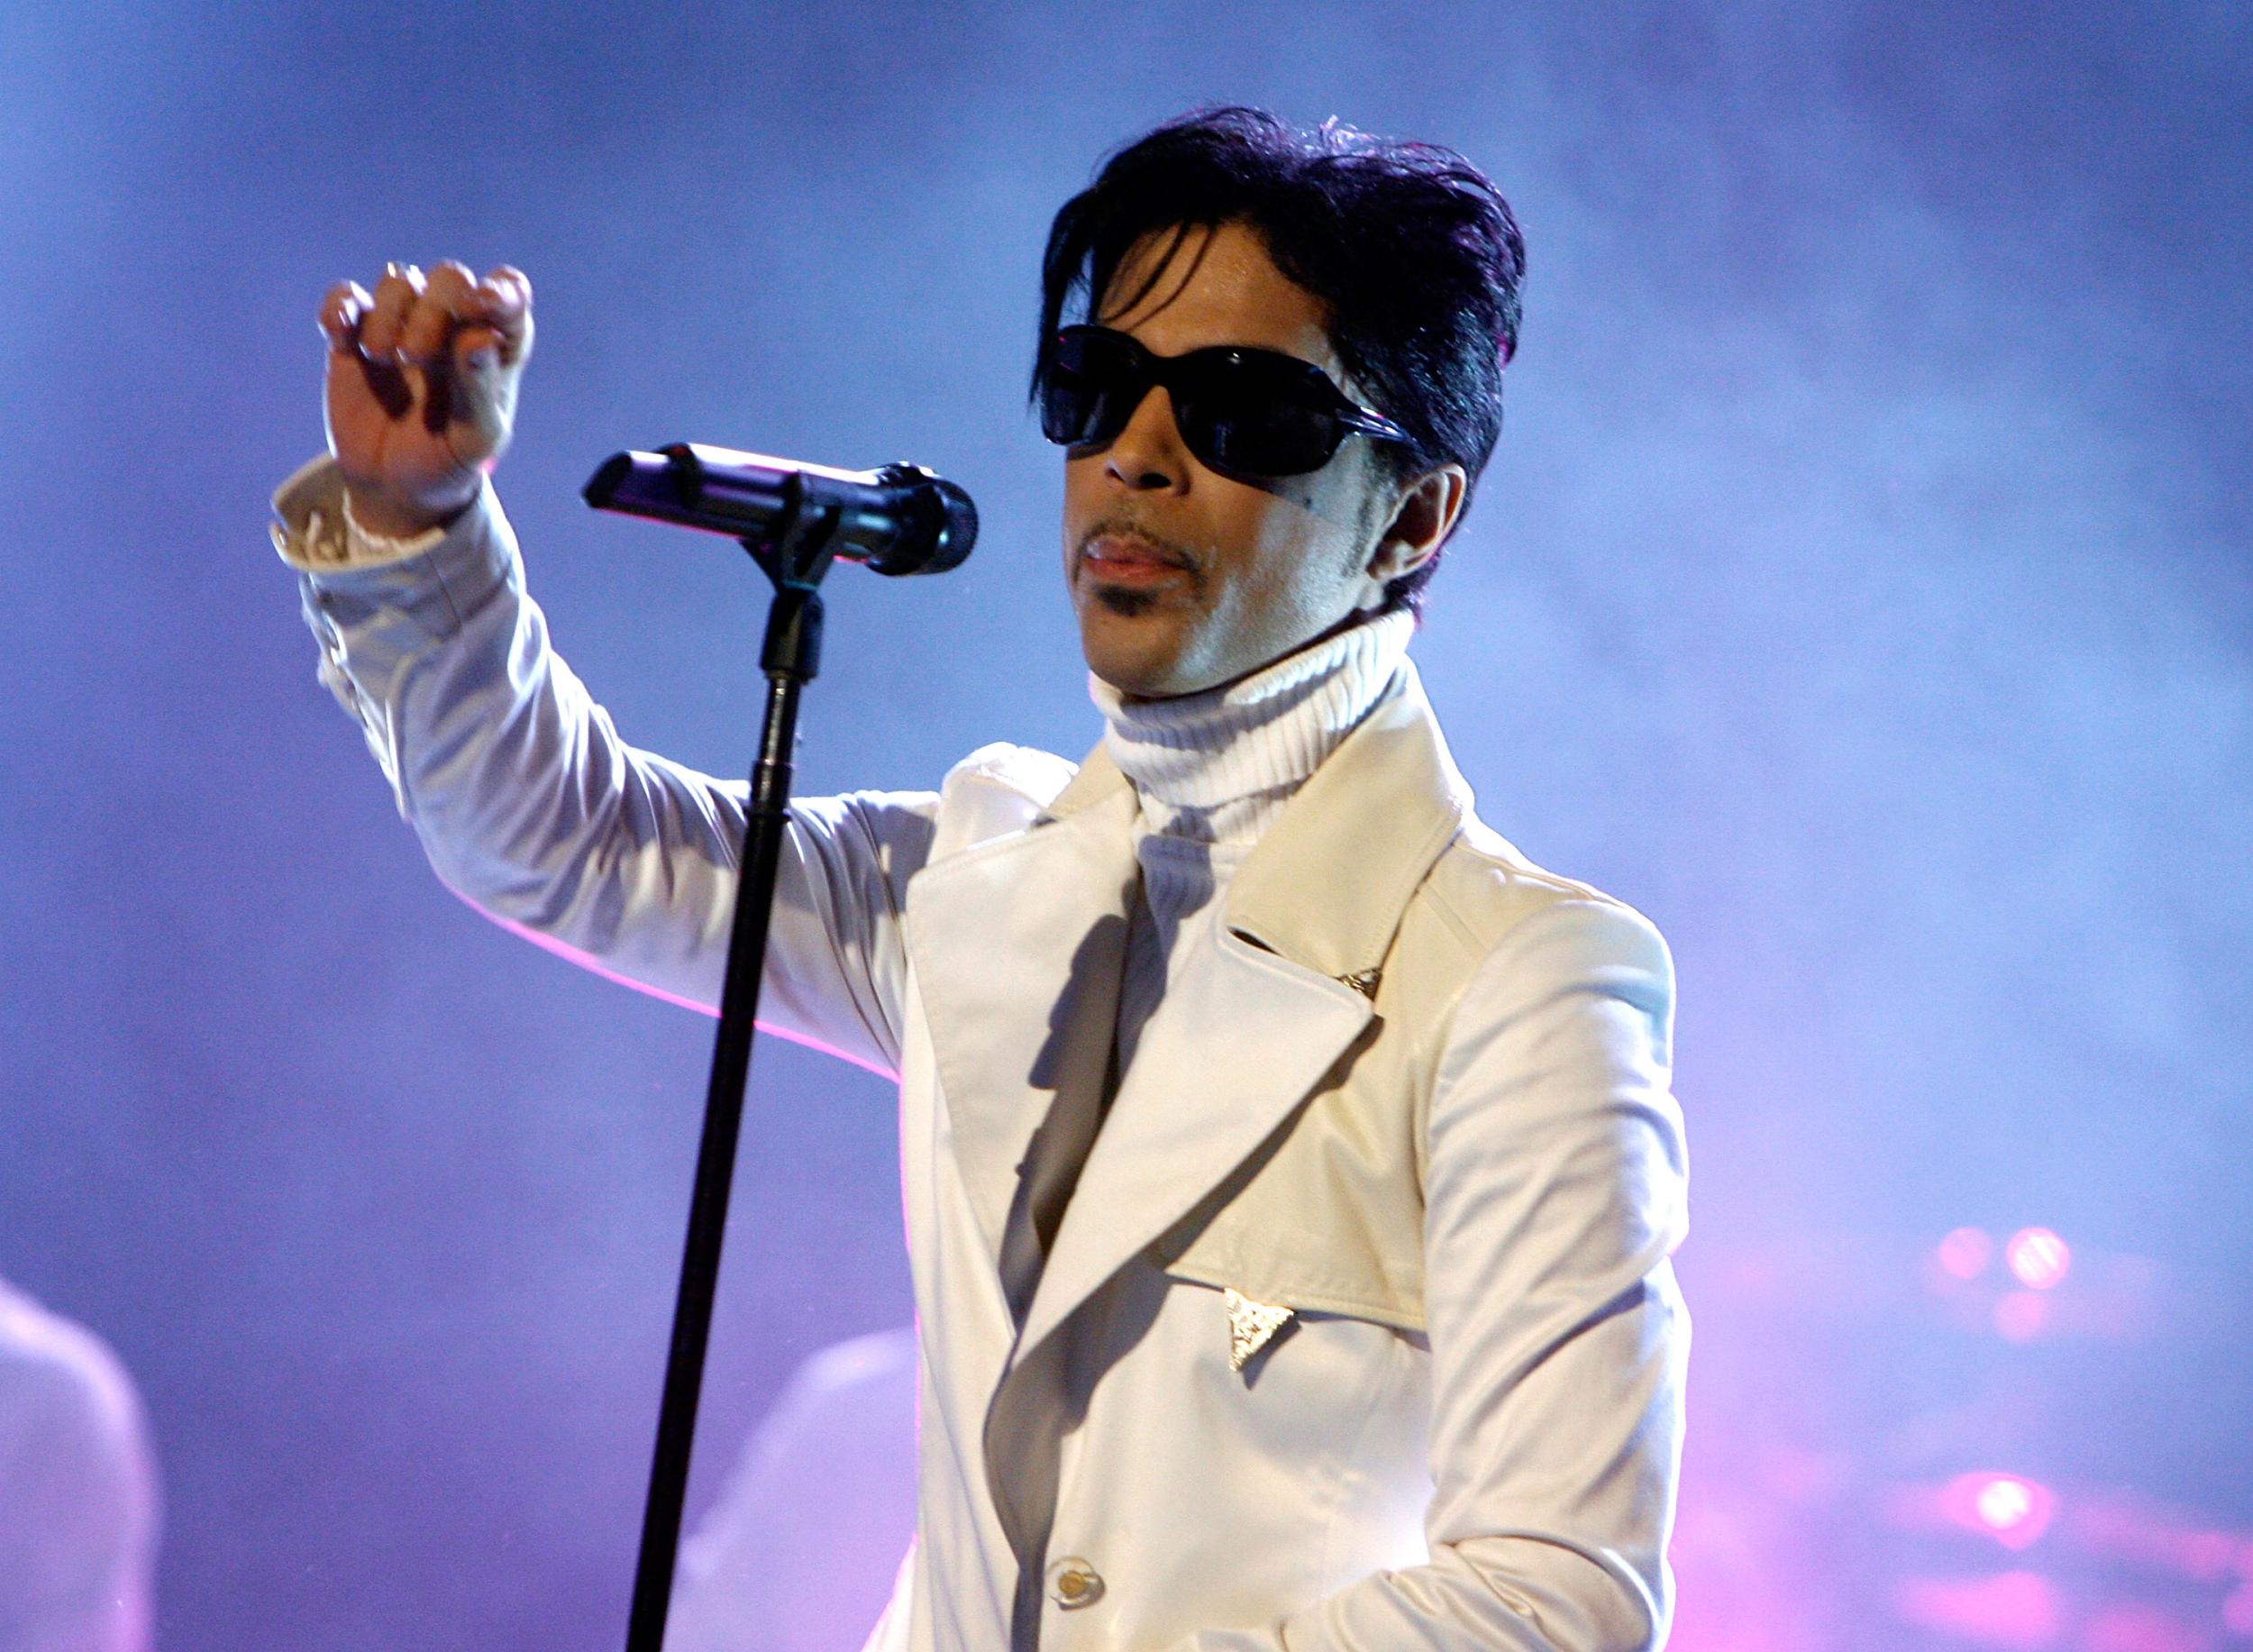 Prince performs onstage during the 2007 NCLR ALMA Awards in 2007